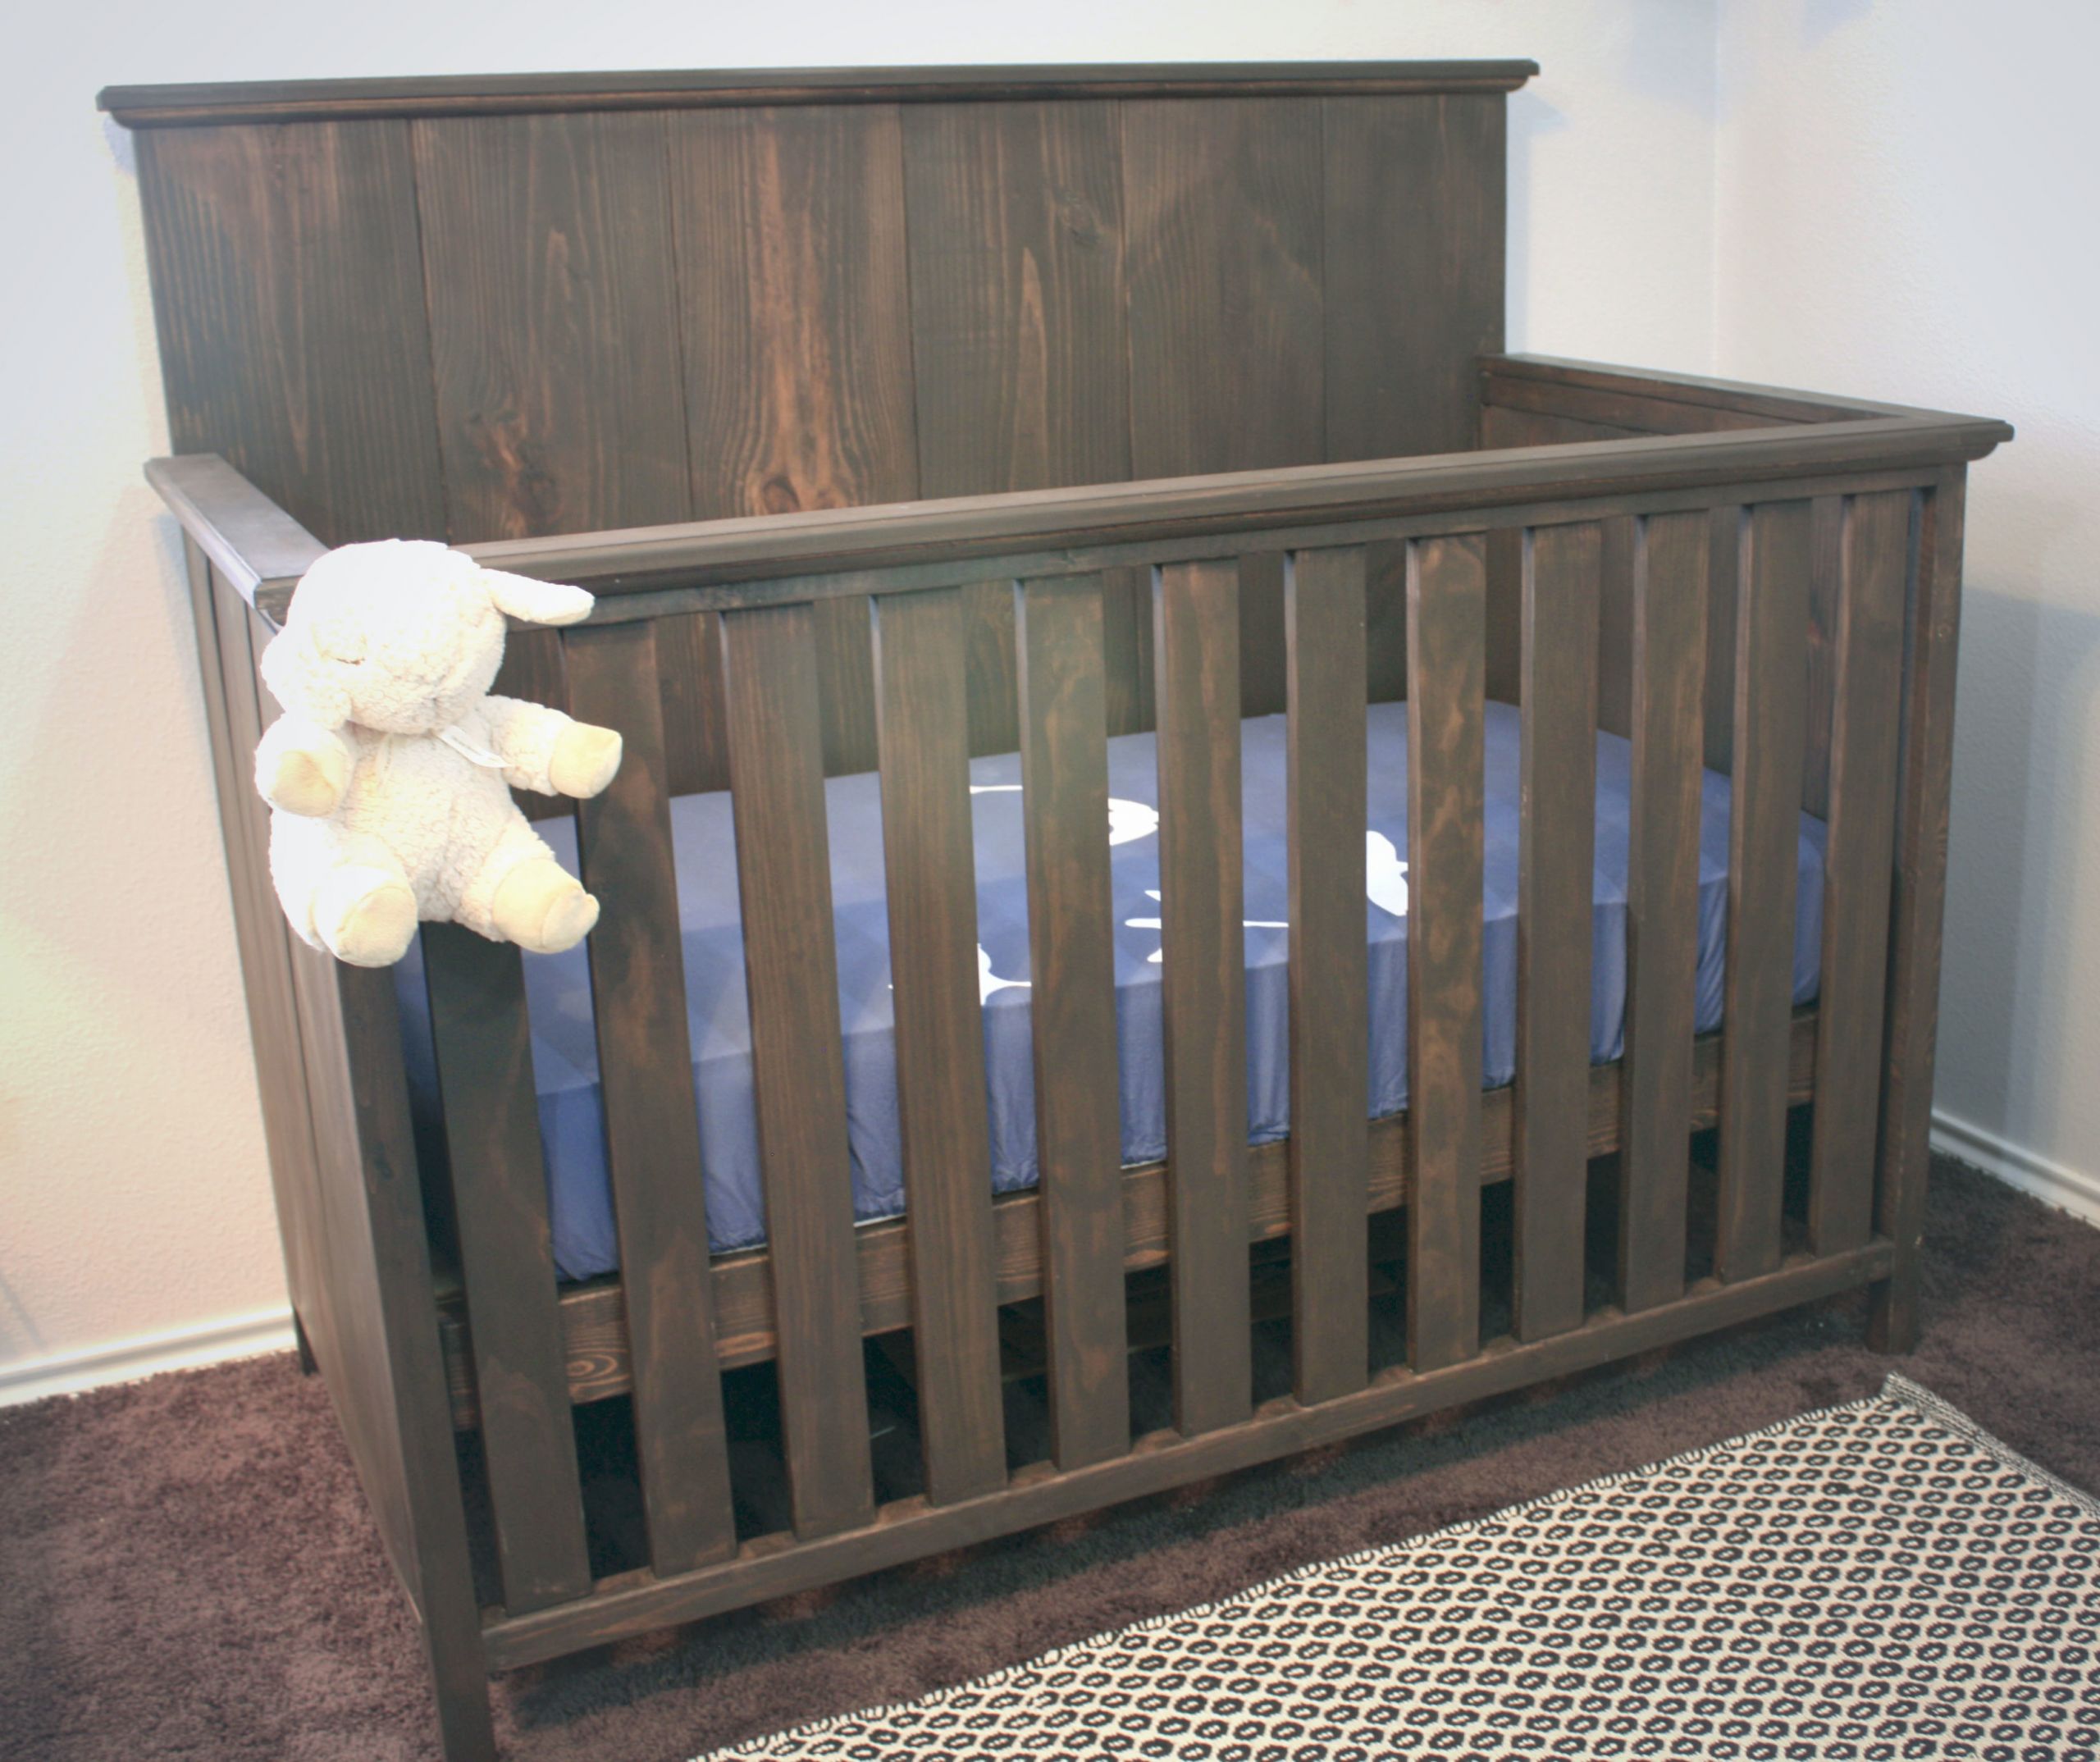 DIY Crib Plans
 How To Build a Crib for $200